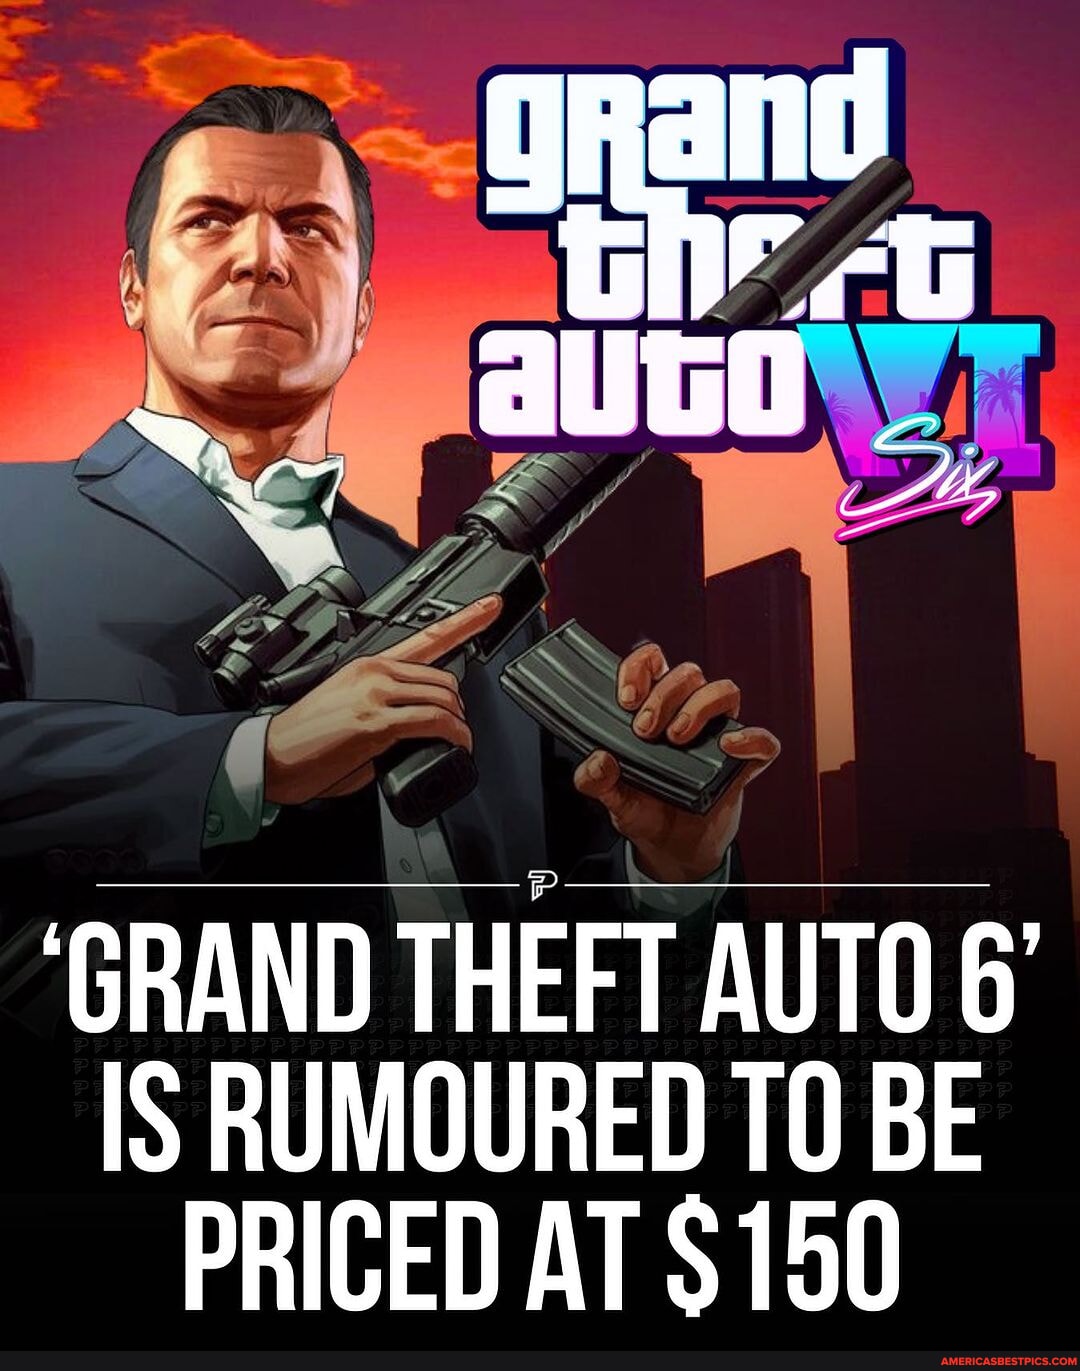 COMPLEX on Instagram: The upcoming release of 'GTA VI' has caused  controversy due to its rumored price tag of $150. Some fans are divided,  with some willing to pay for the game